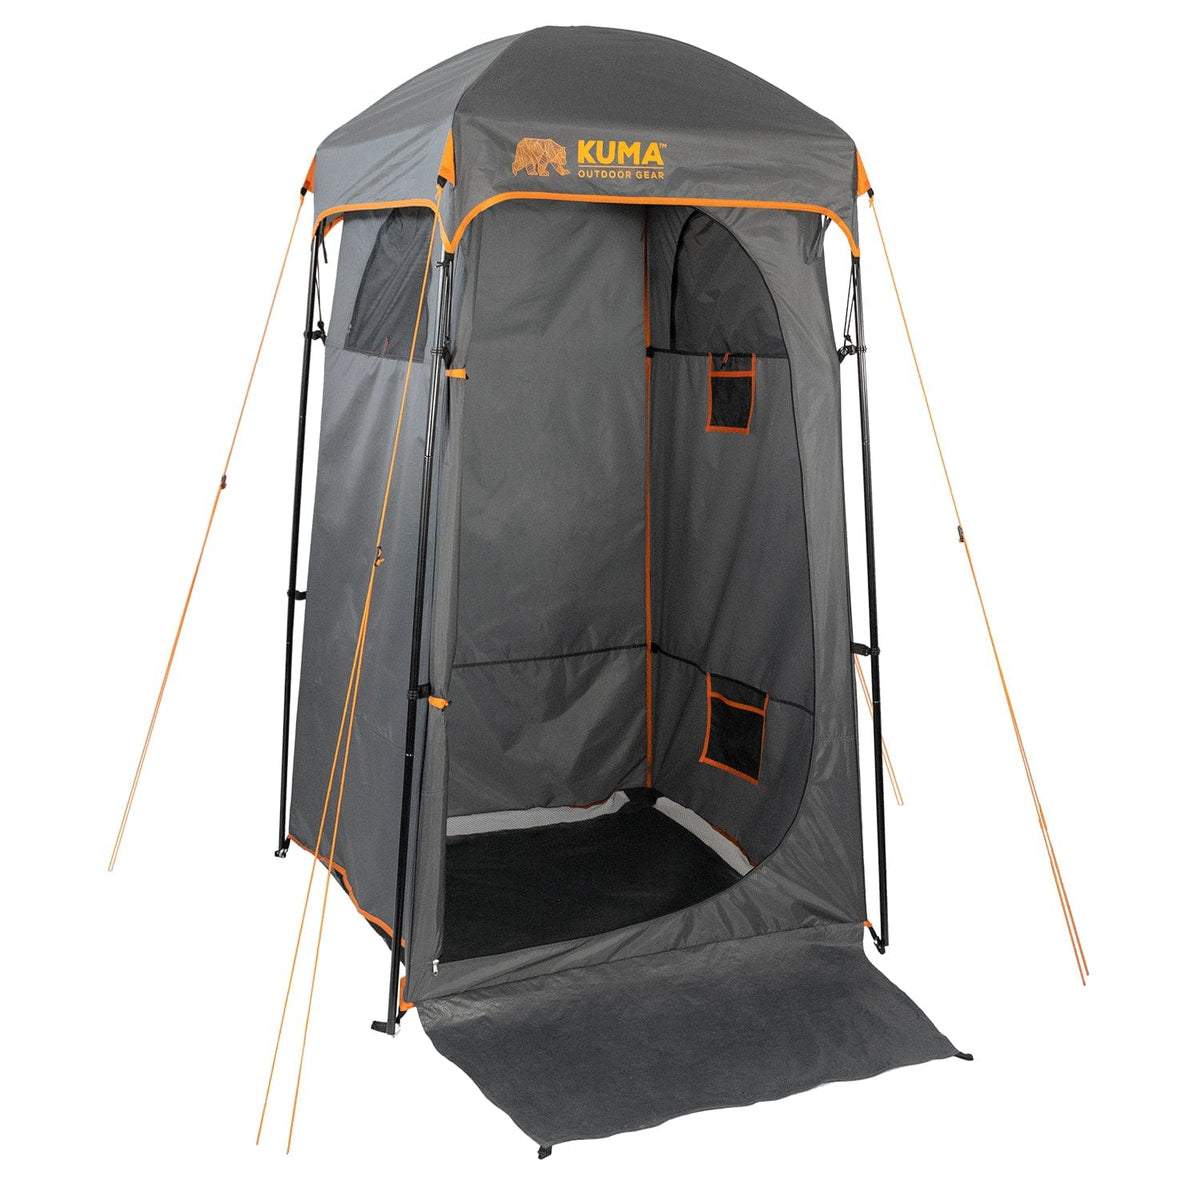 Kuma Outdoor Gear Qualifies for Free Shipping Kuma Outdoor Gear Peaks Privacy Shelter #874-KM-PPS-GROR